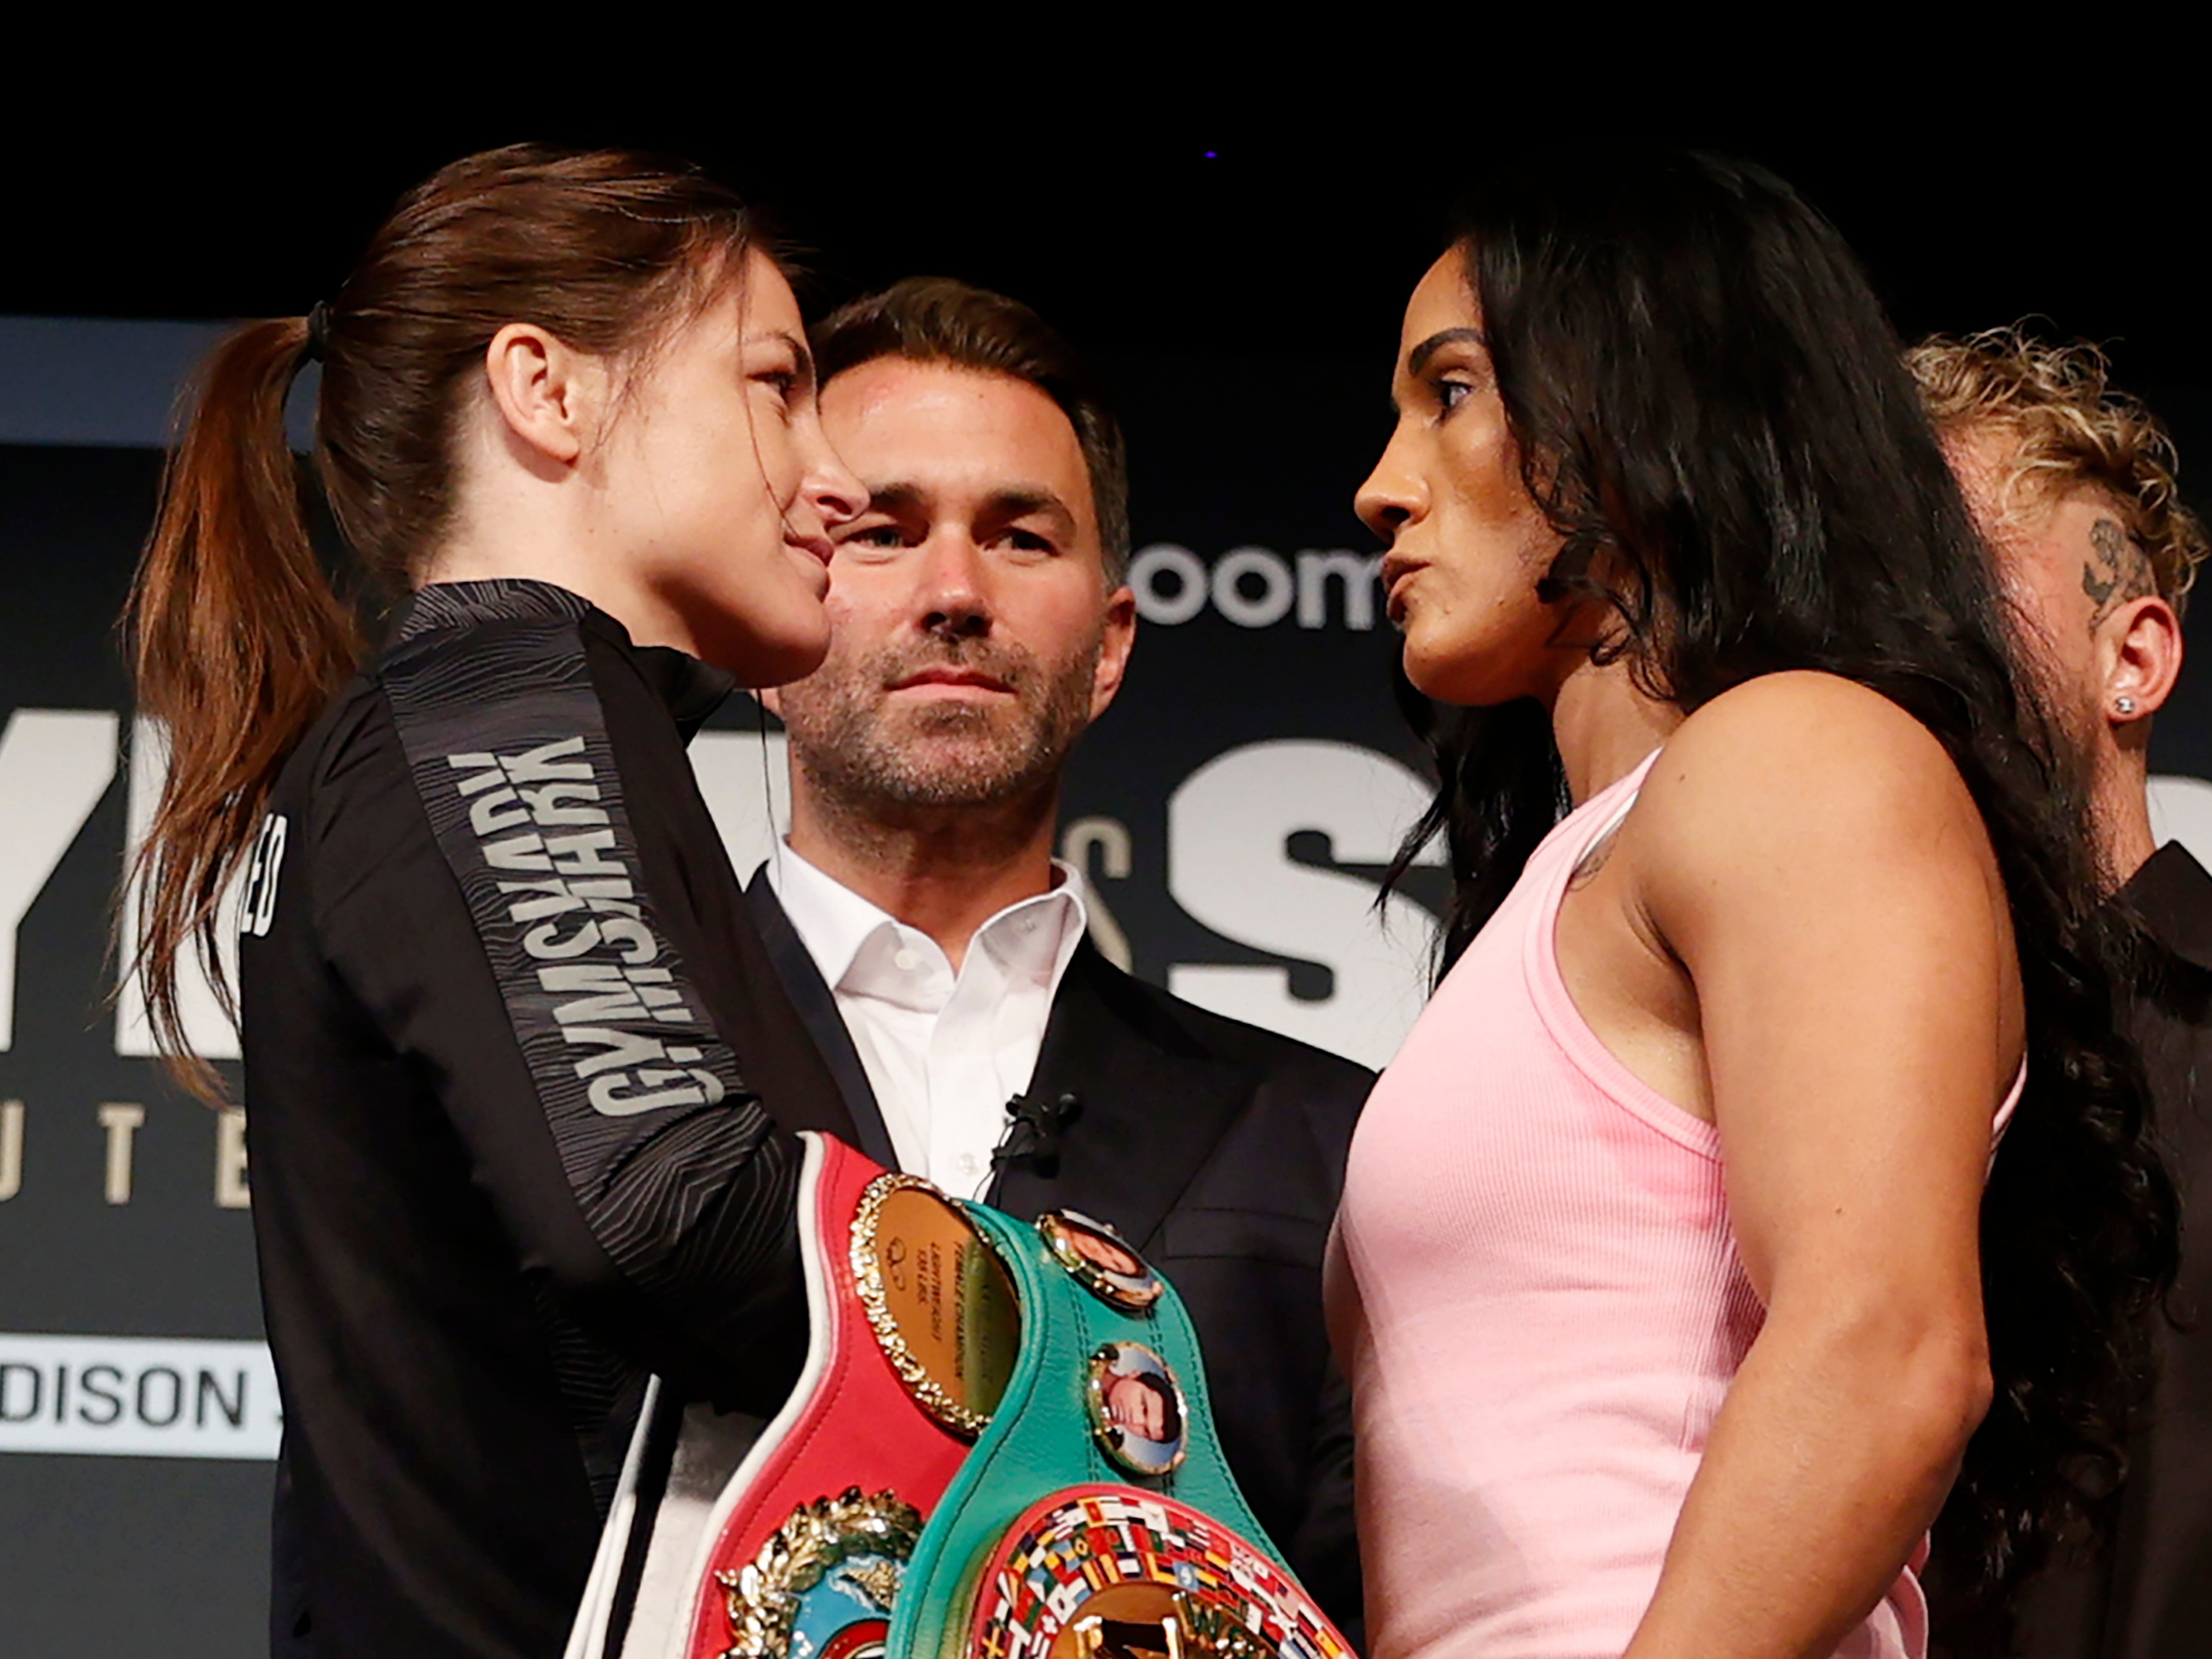 Katie Taylor (left) and Amanda Serrano are the first female boxers to headline Madison Square Garden